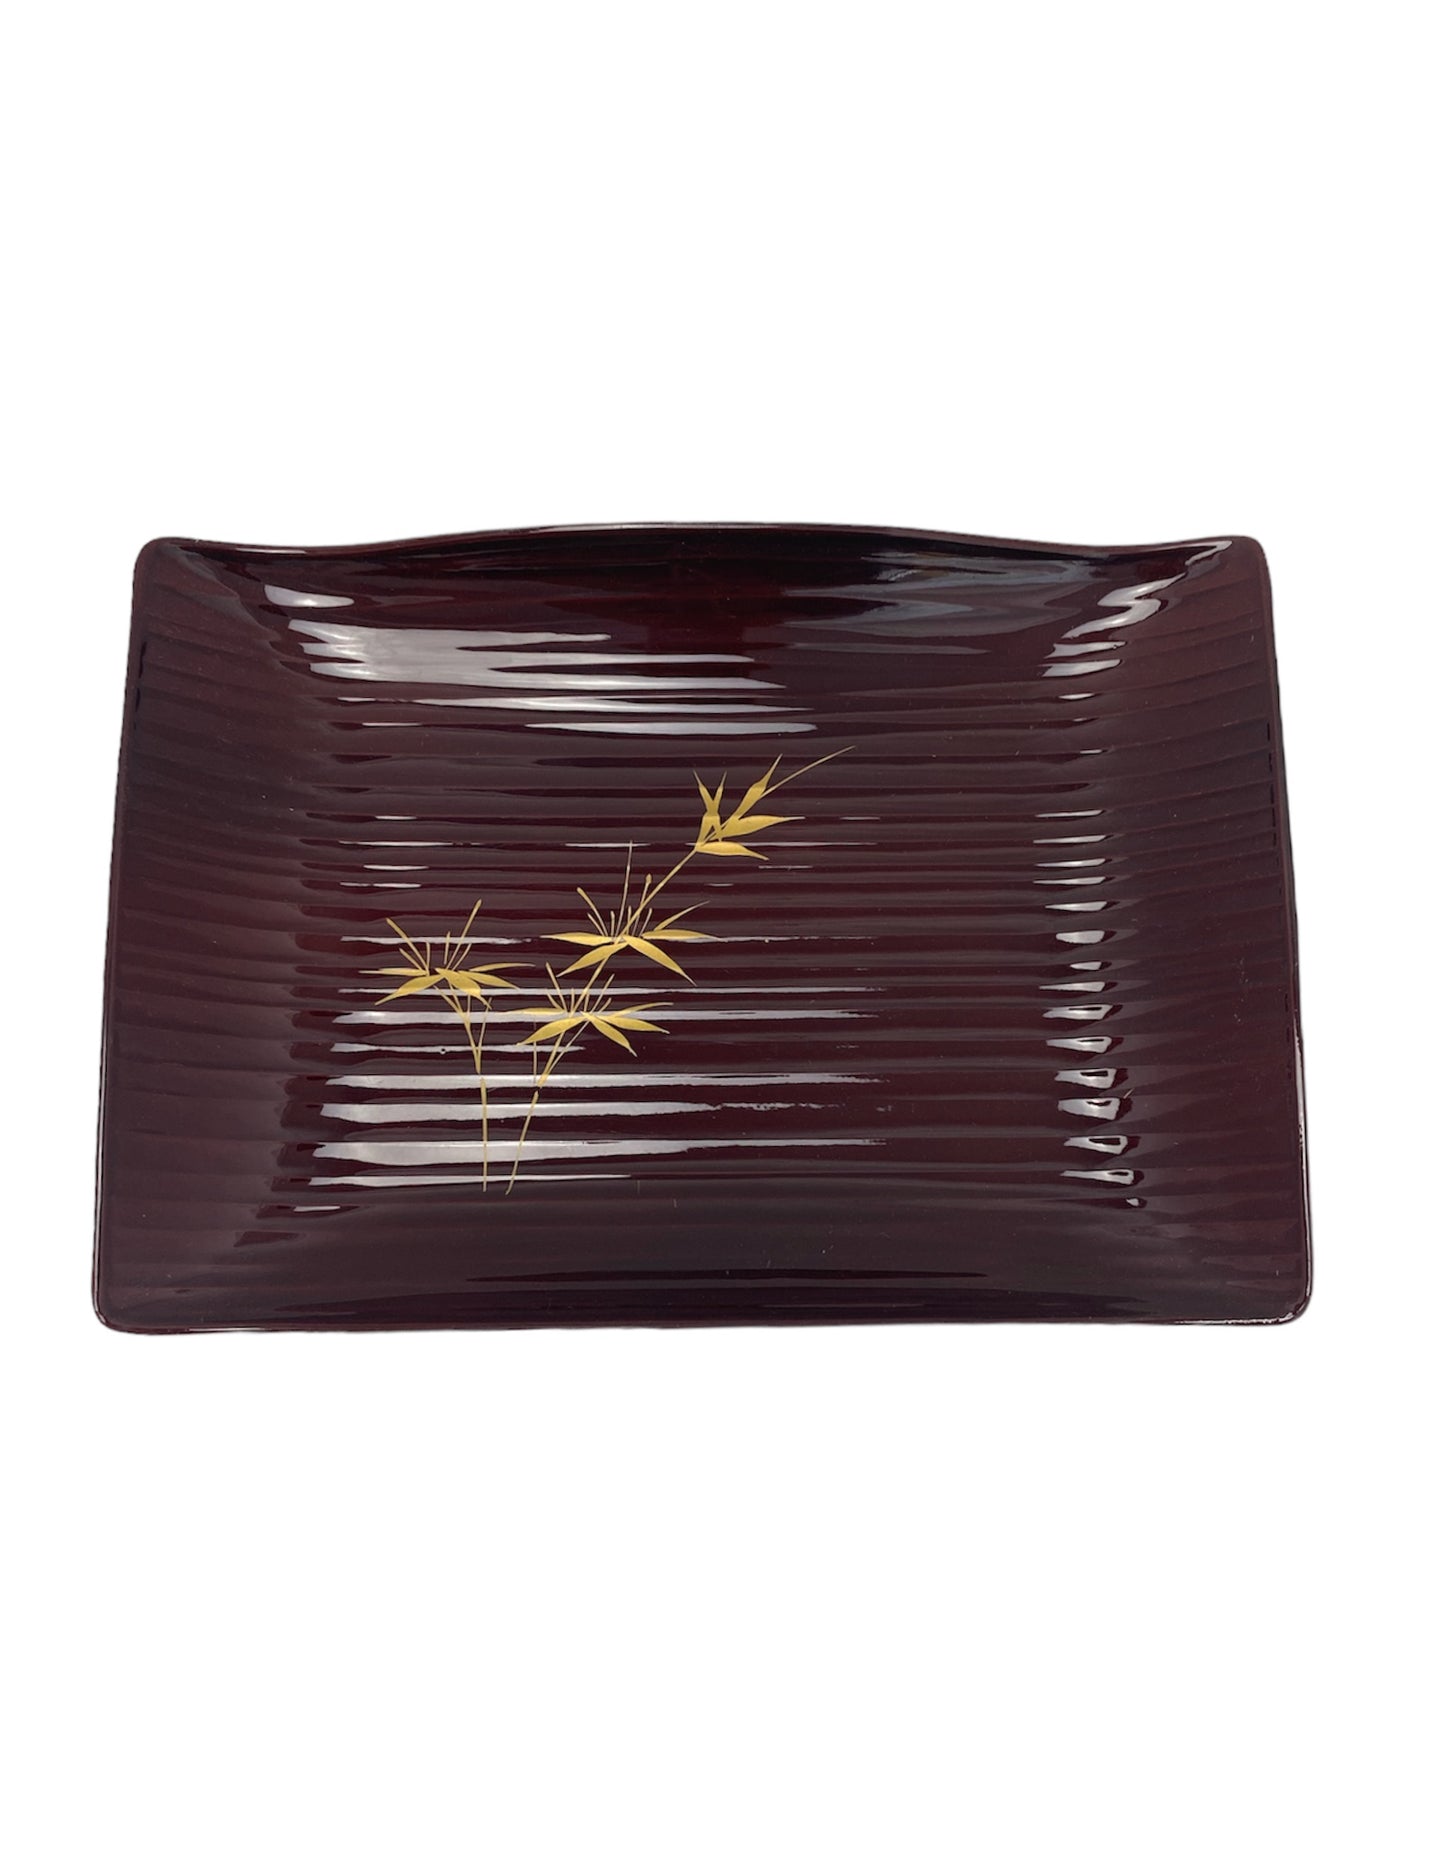 Lacquered plate for Japanese confectionery